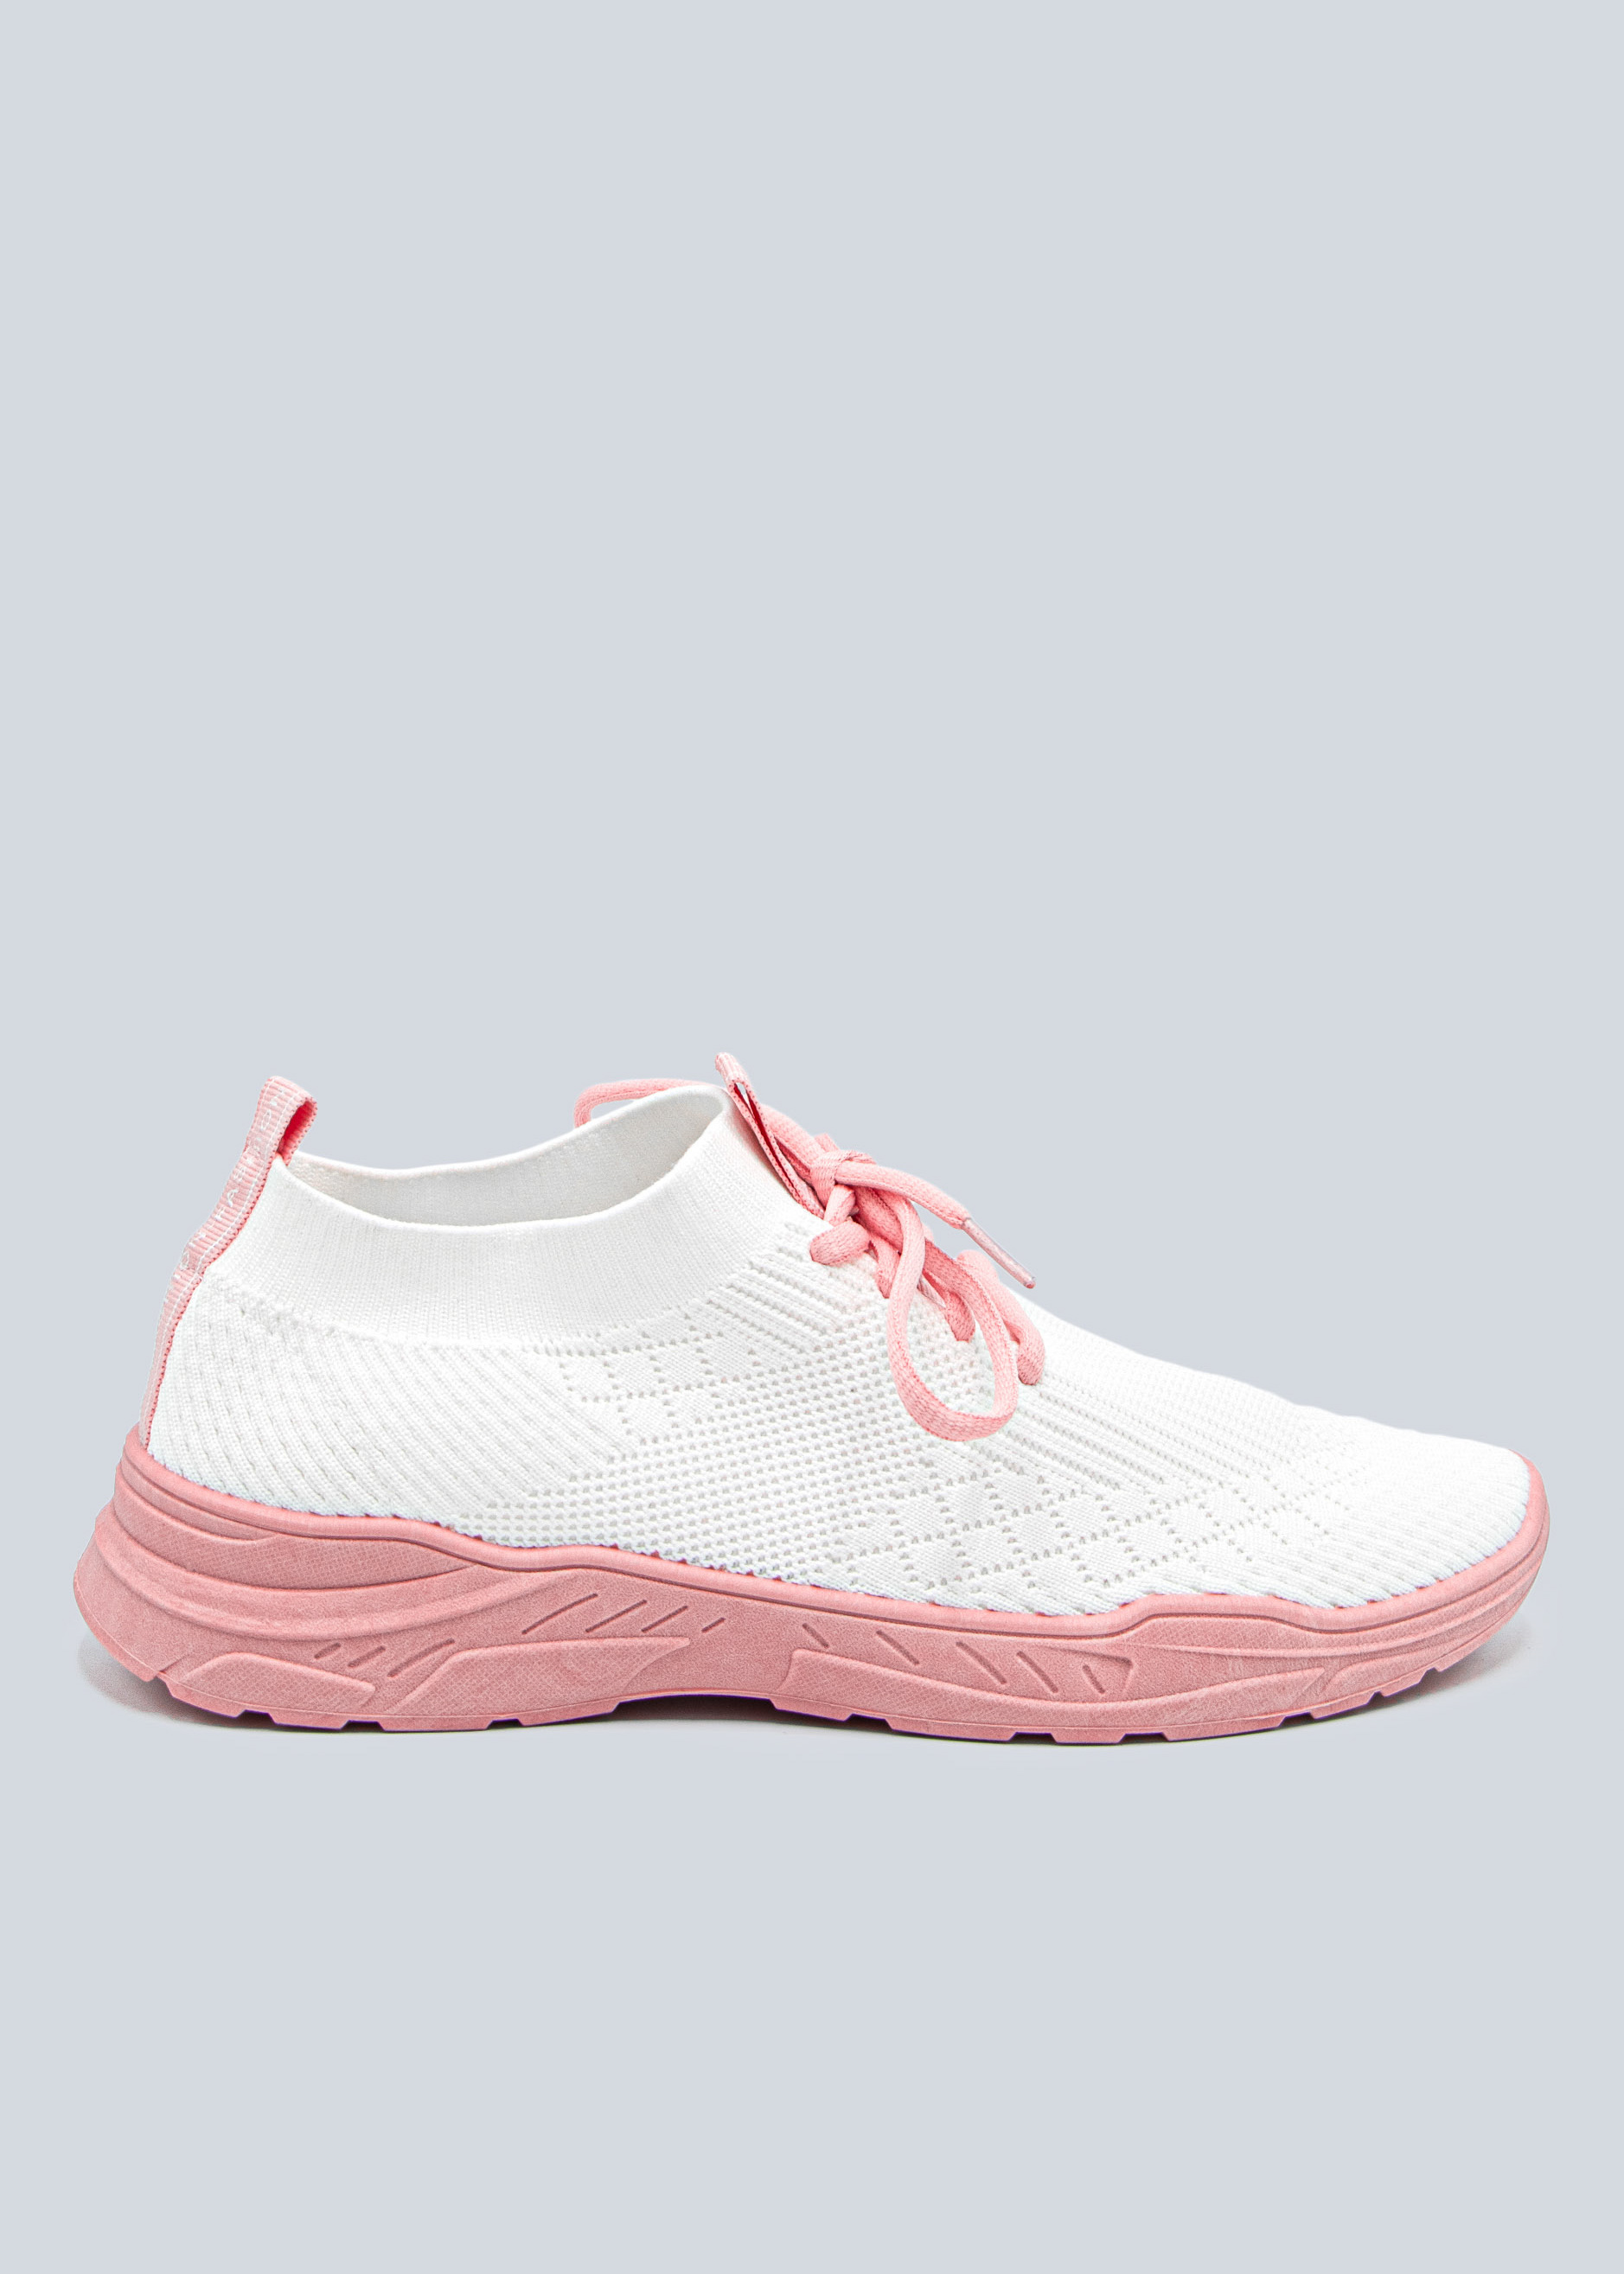 Sneaker with pink sole, white 